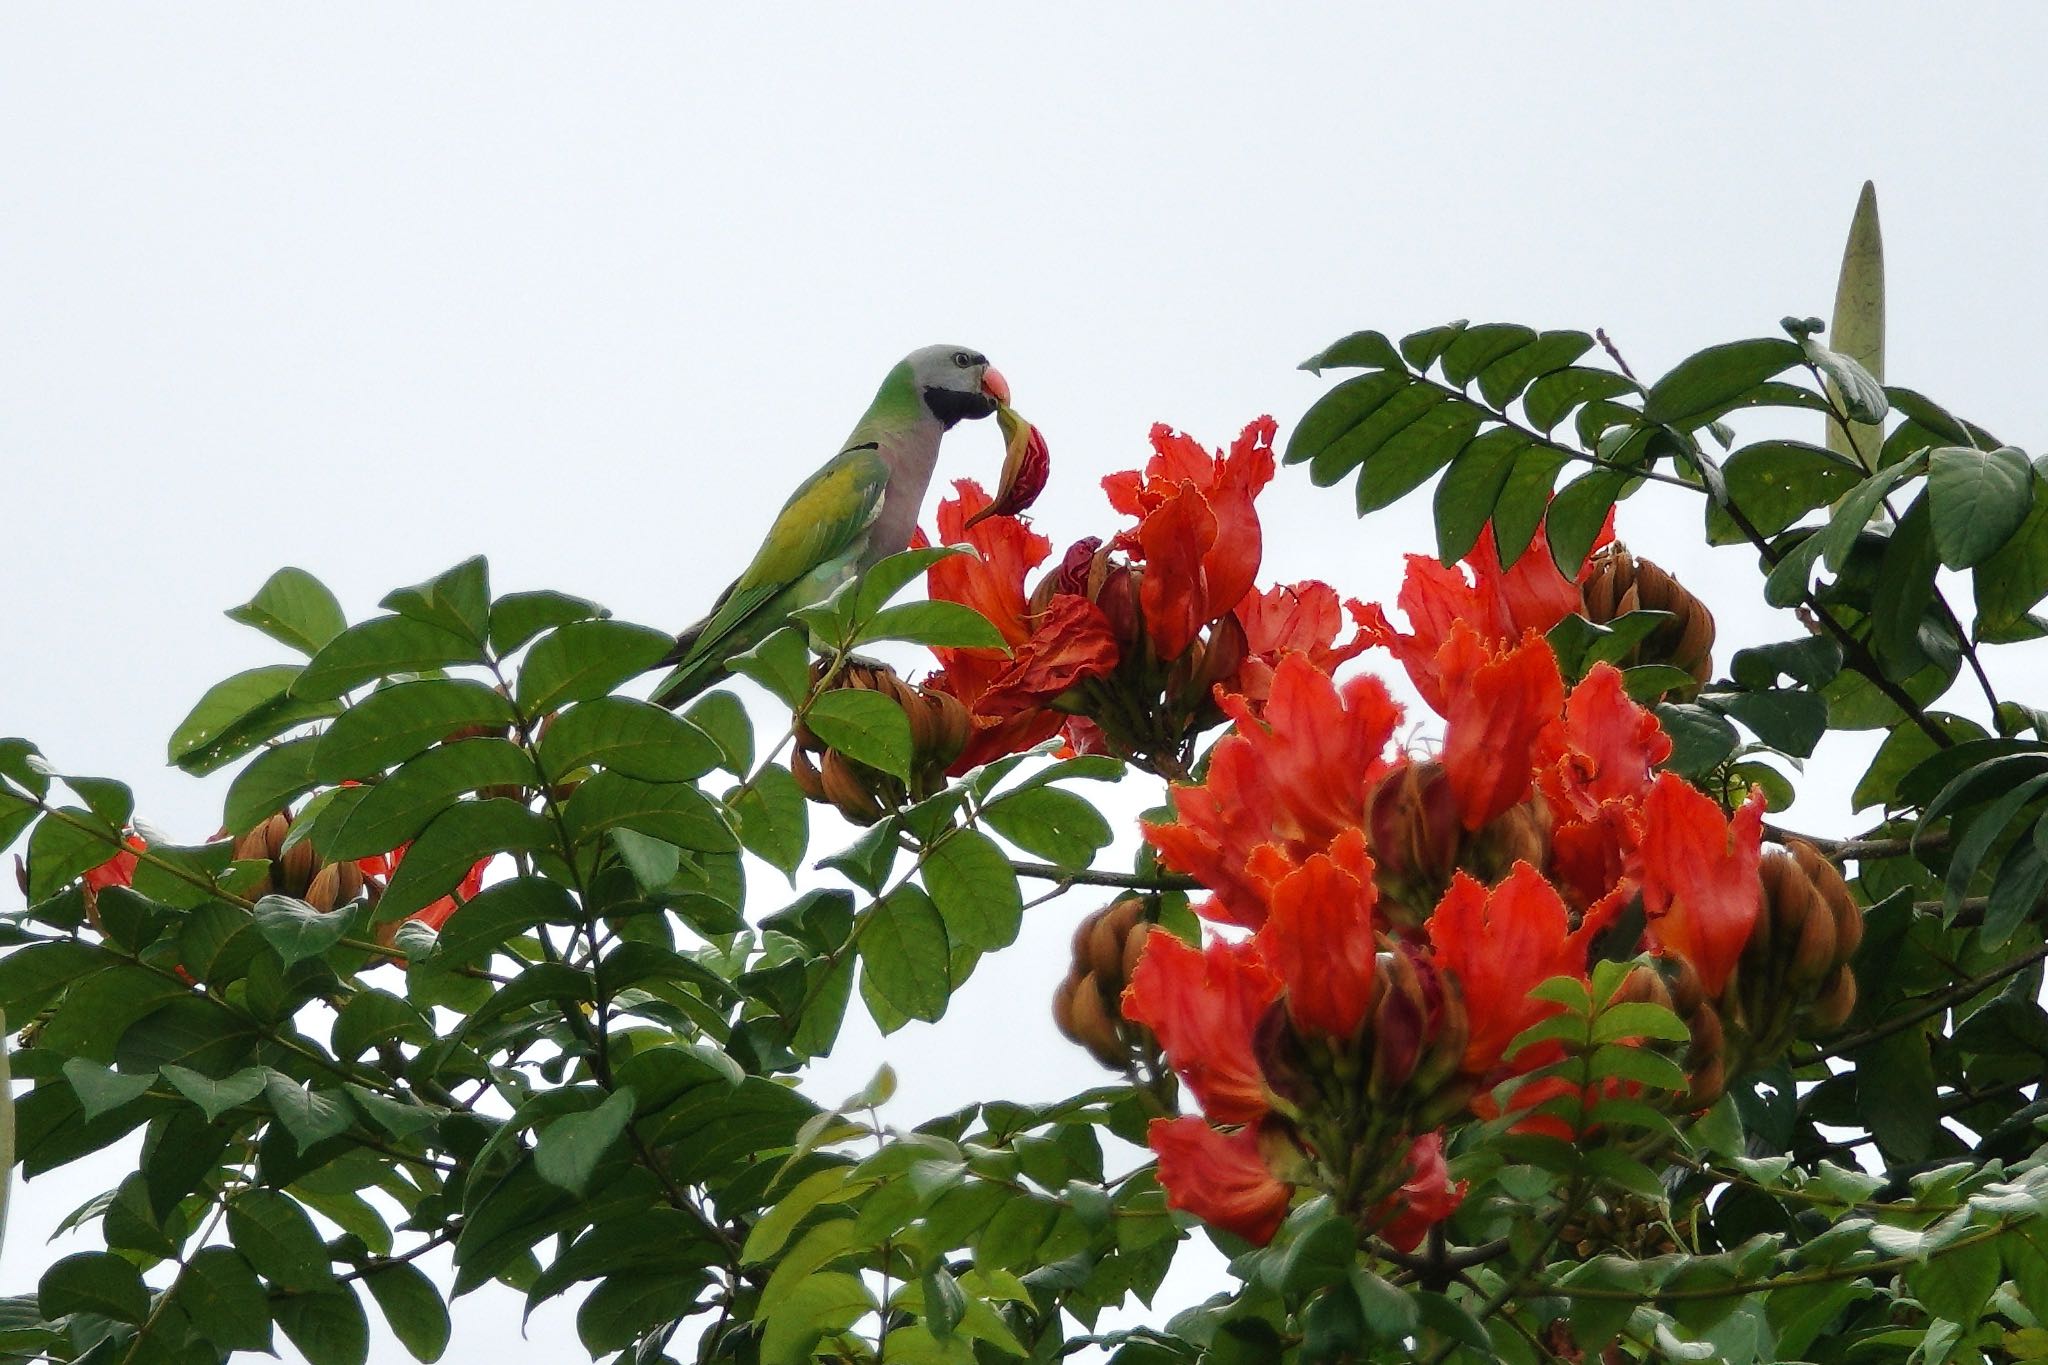 Photo of Red-breasted Parakeet at Sungei Buloh Wetland Reserve by のどか